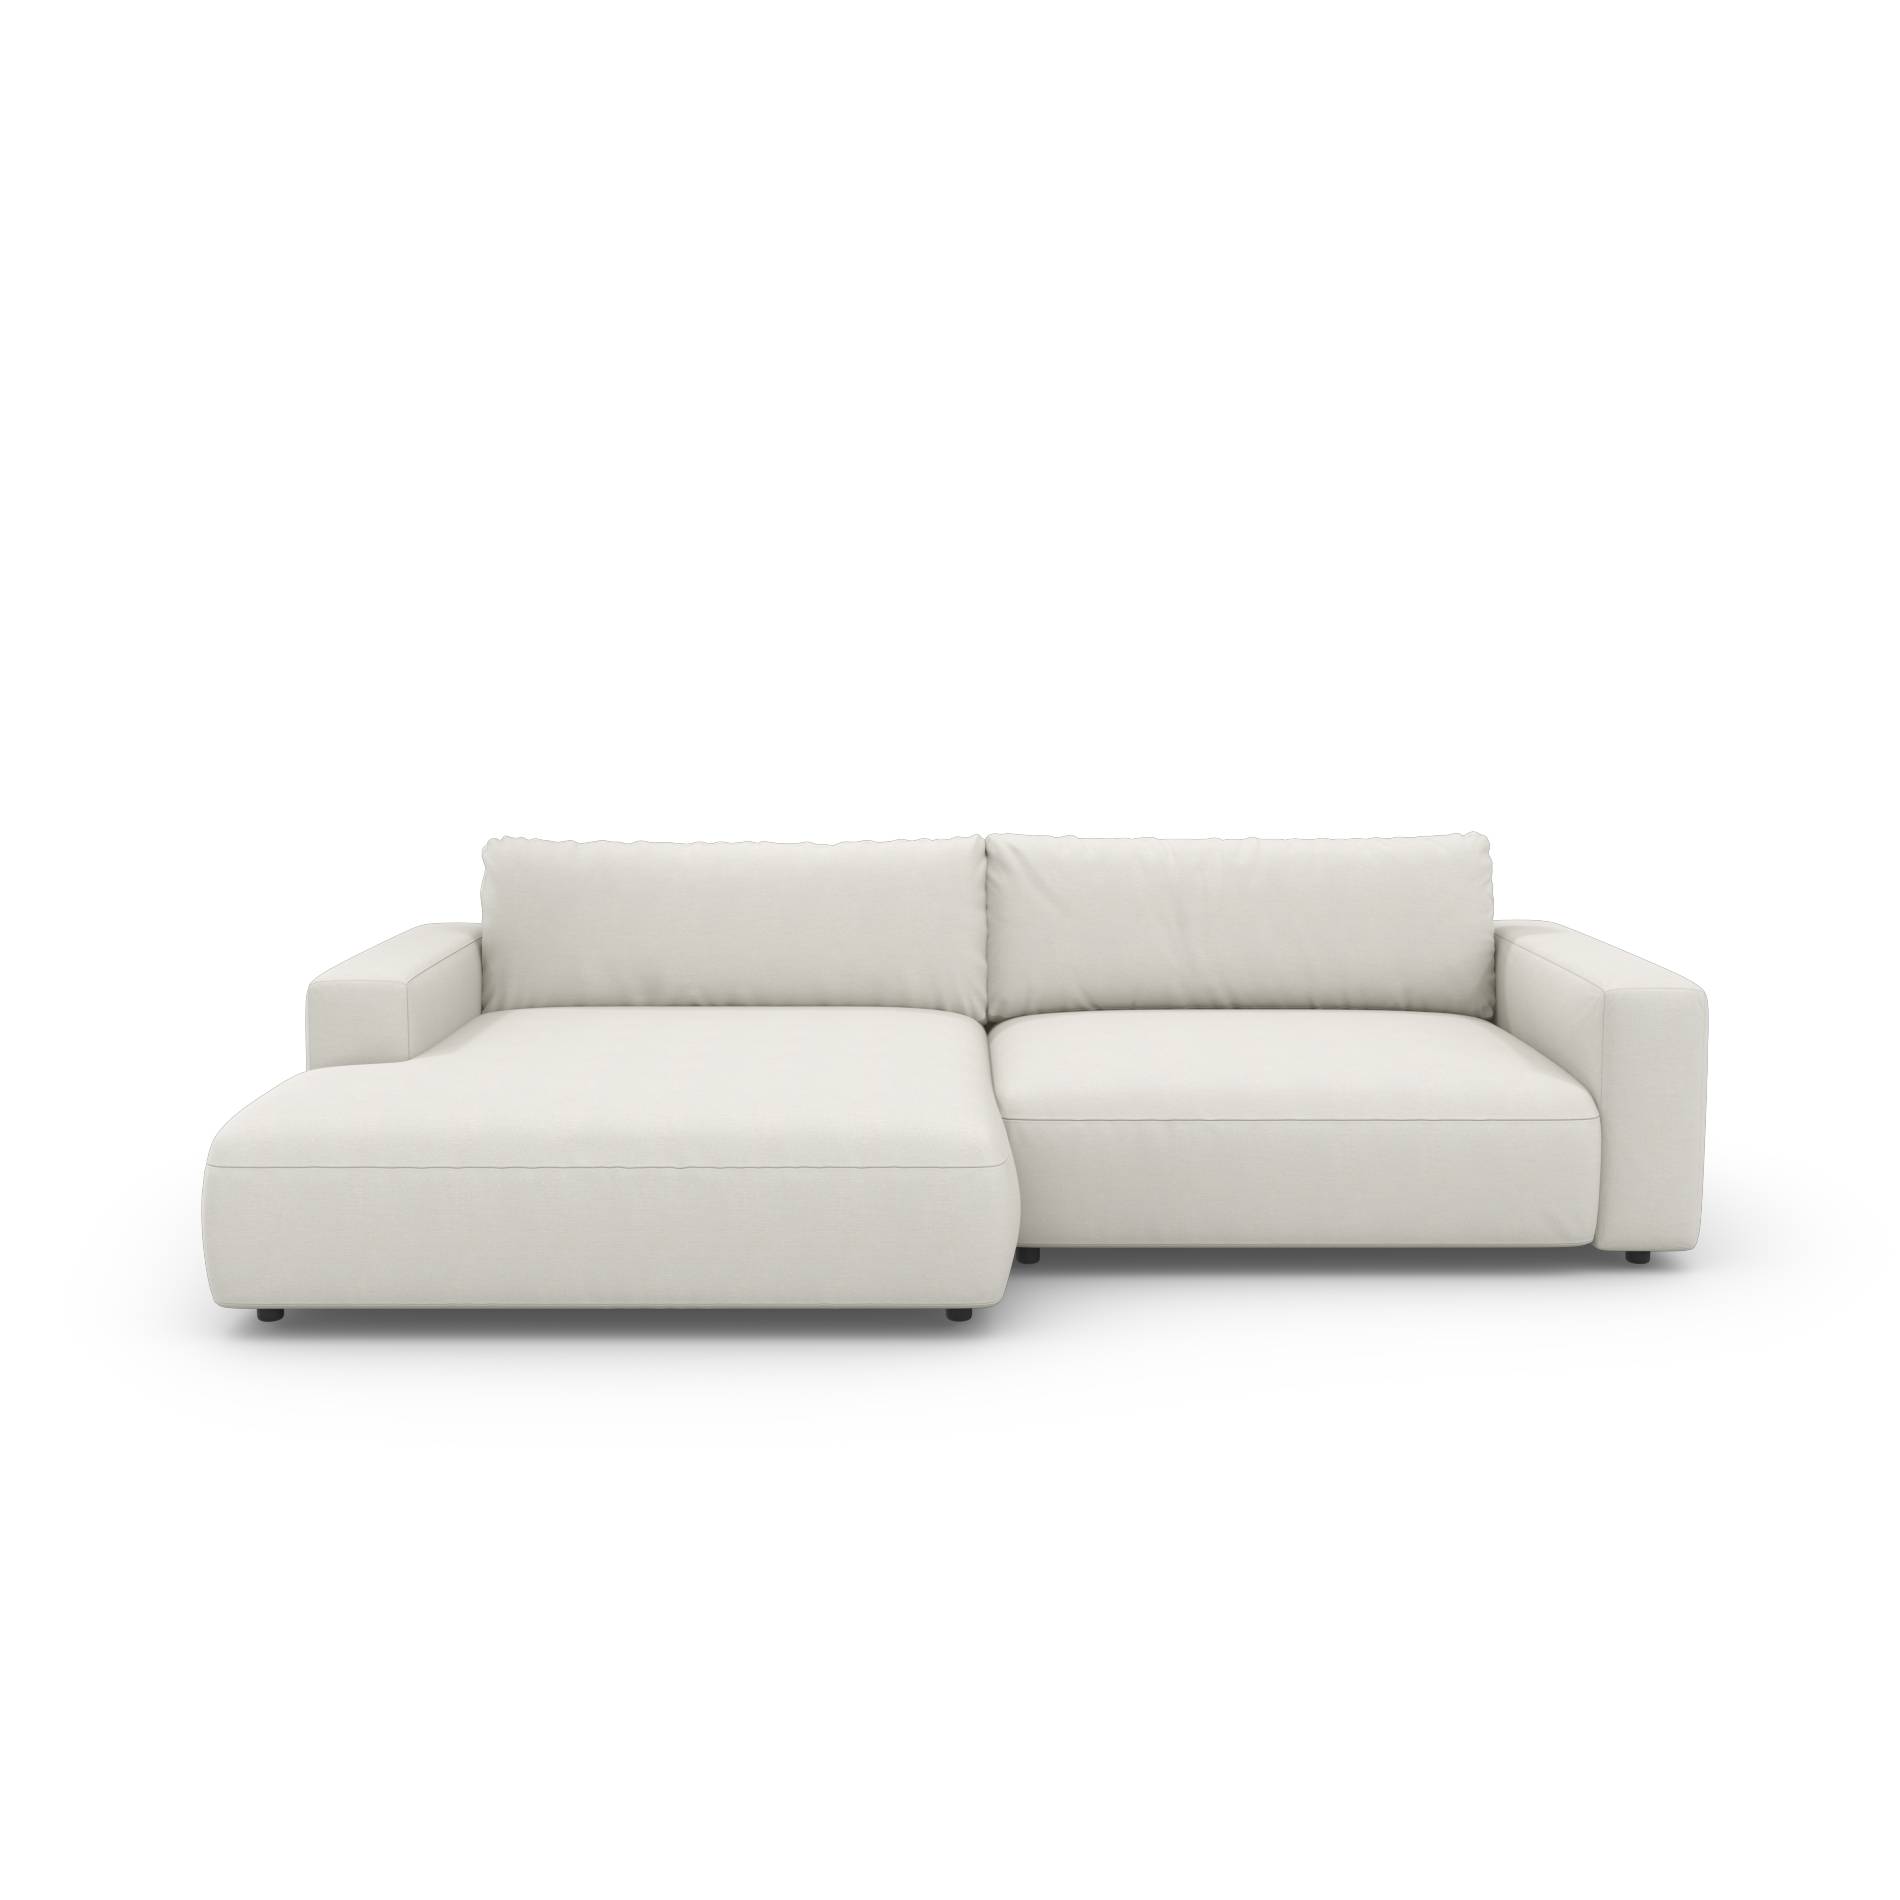 Sofa Lucia branded Gallery M by Musterring